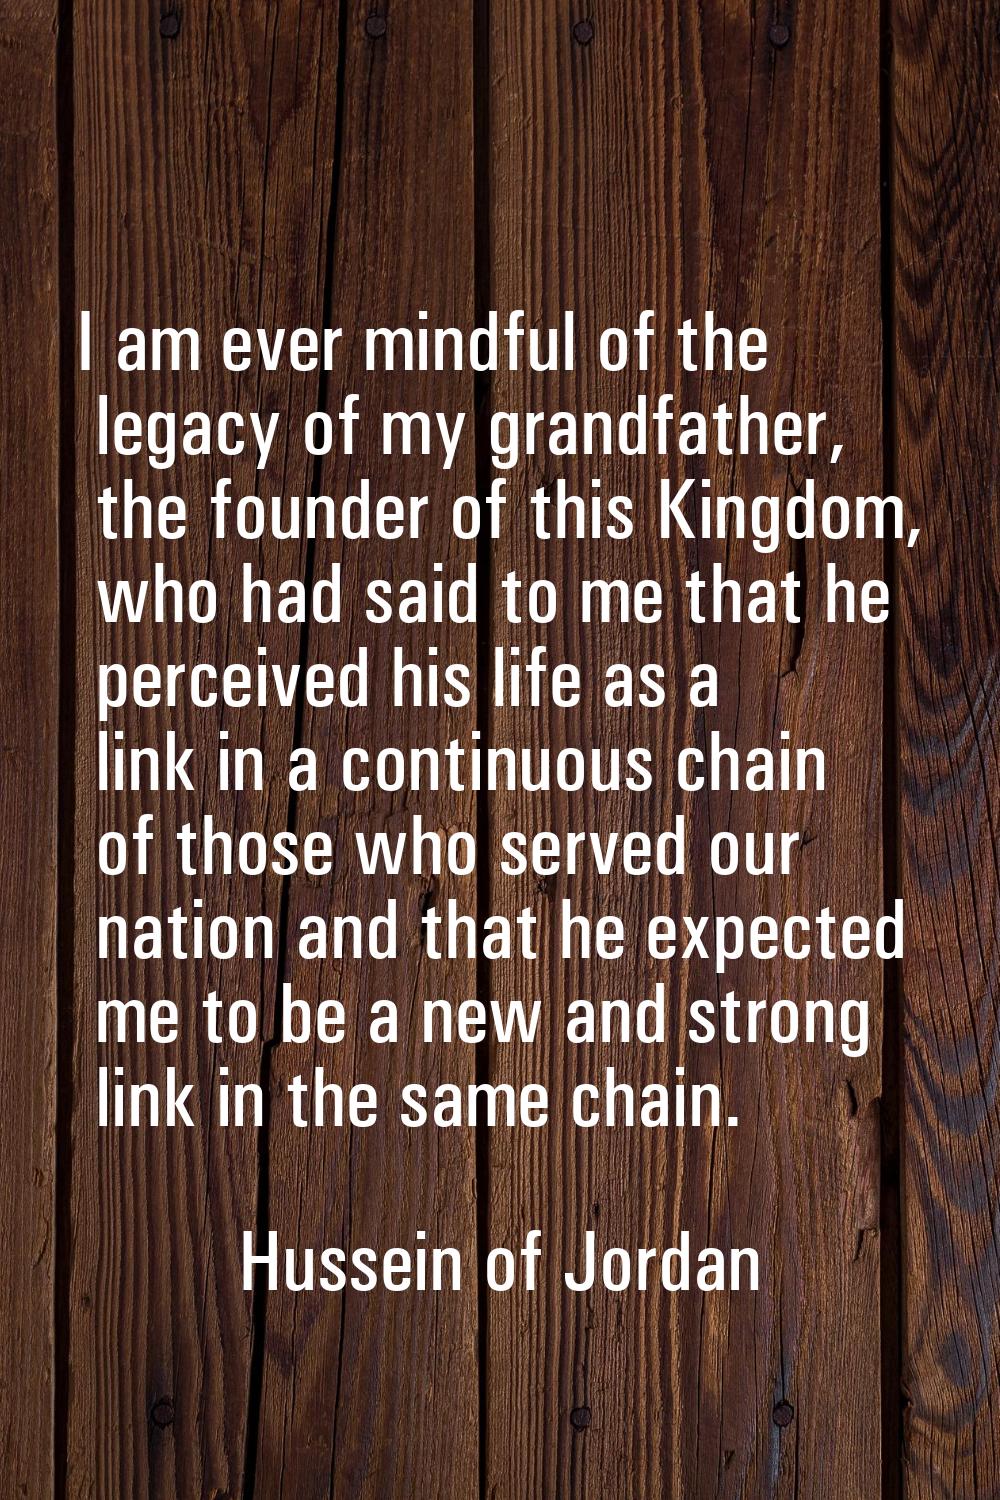 I am ever mindful of the legacy of my grandfather, the founder of this Kingdom, who had said to me 